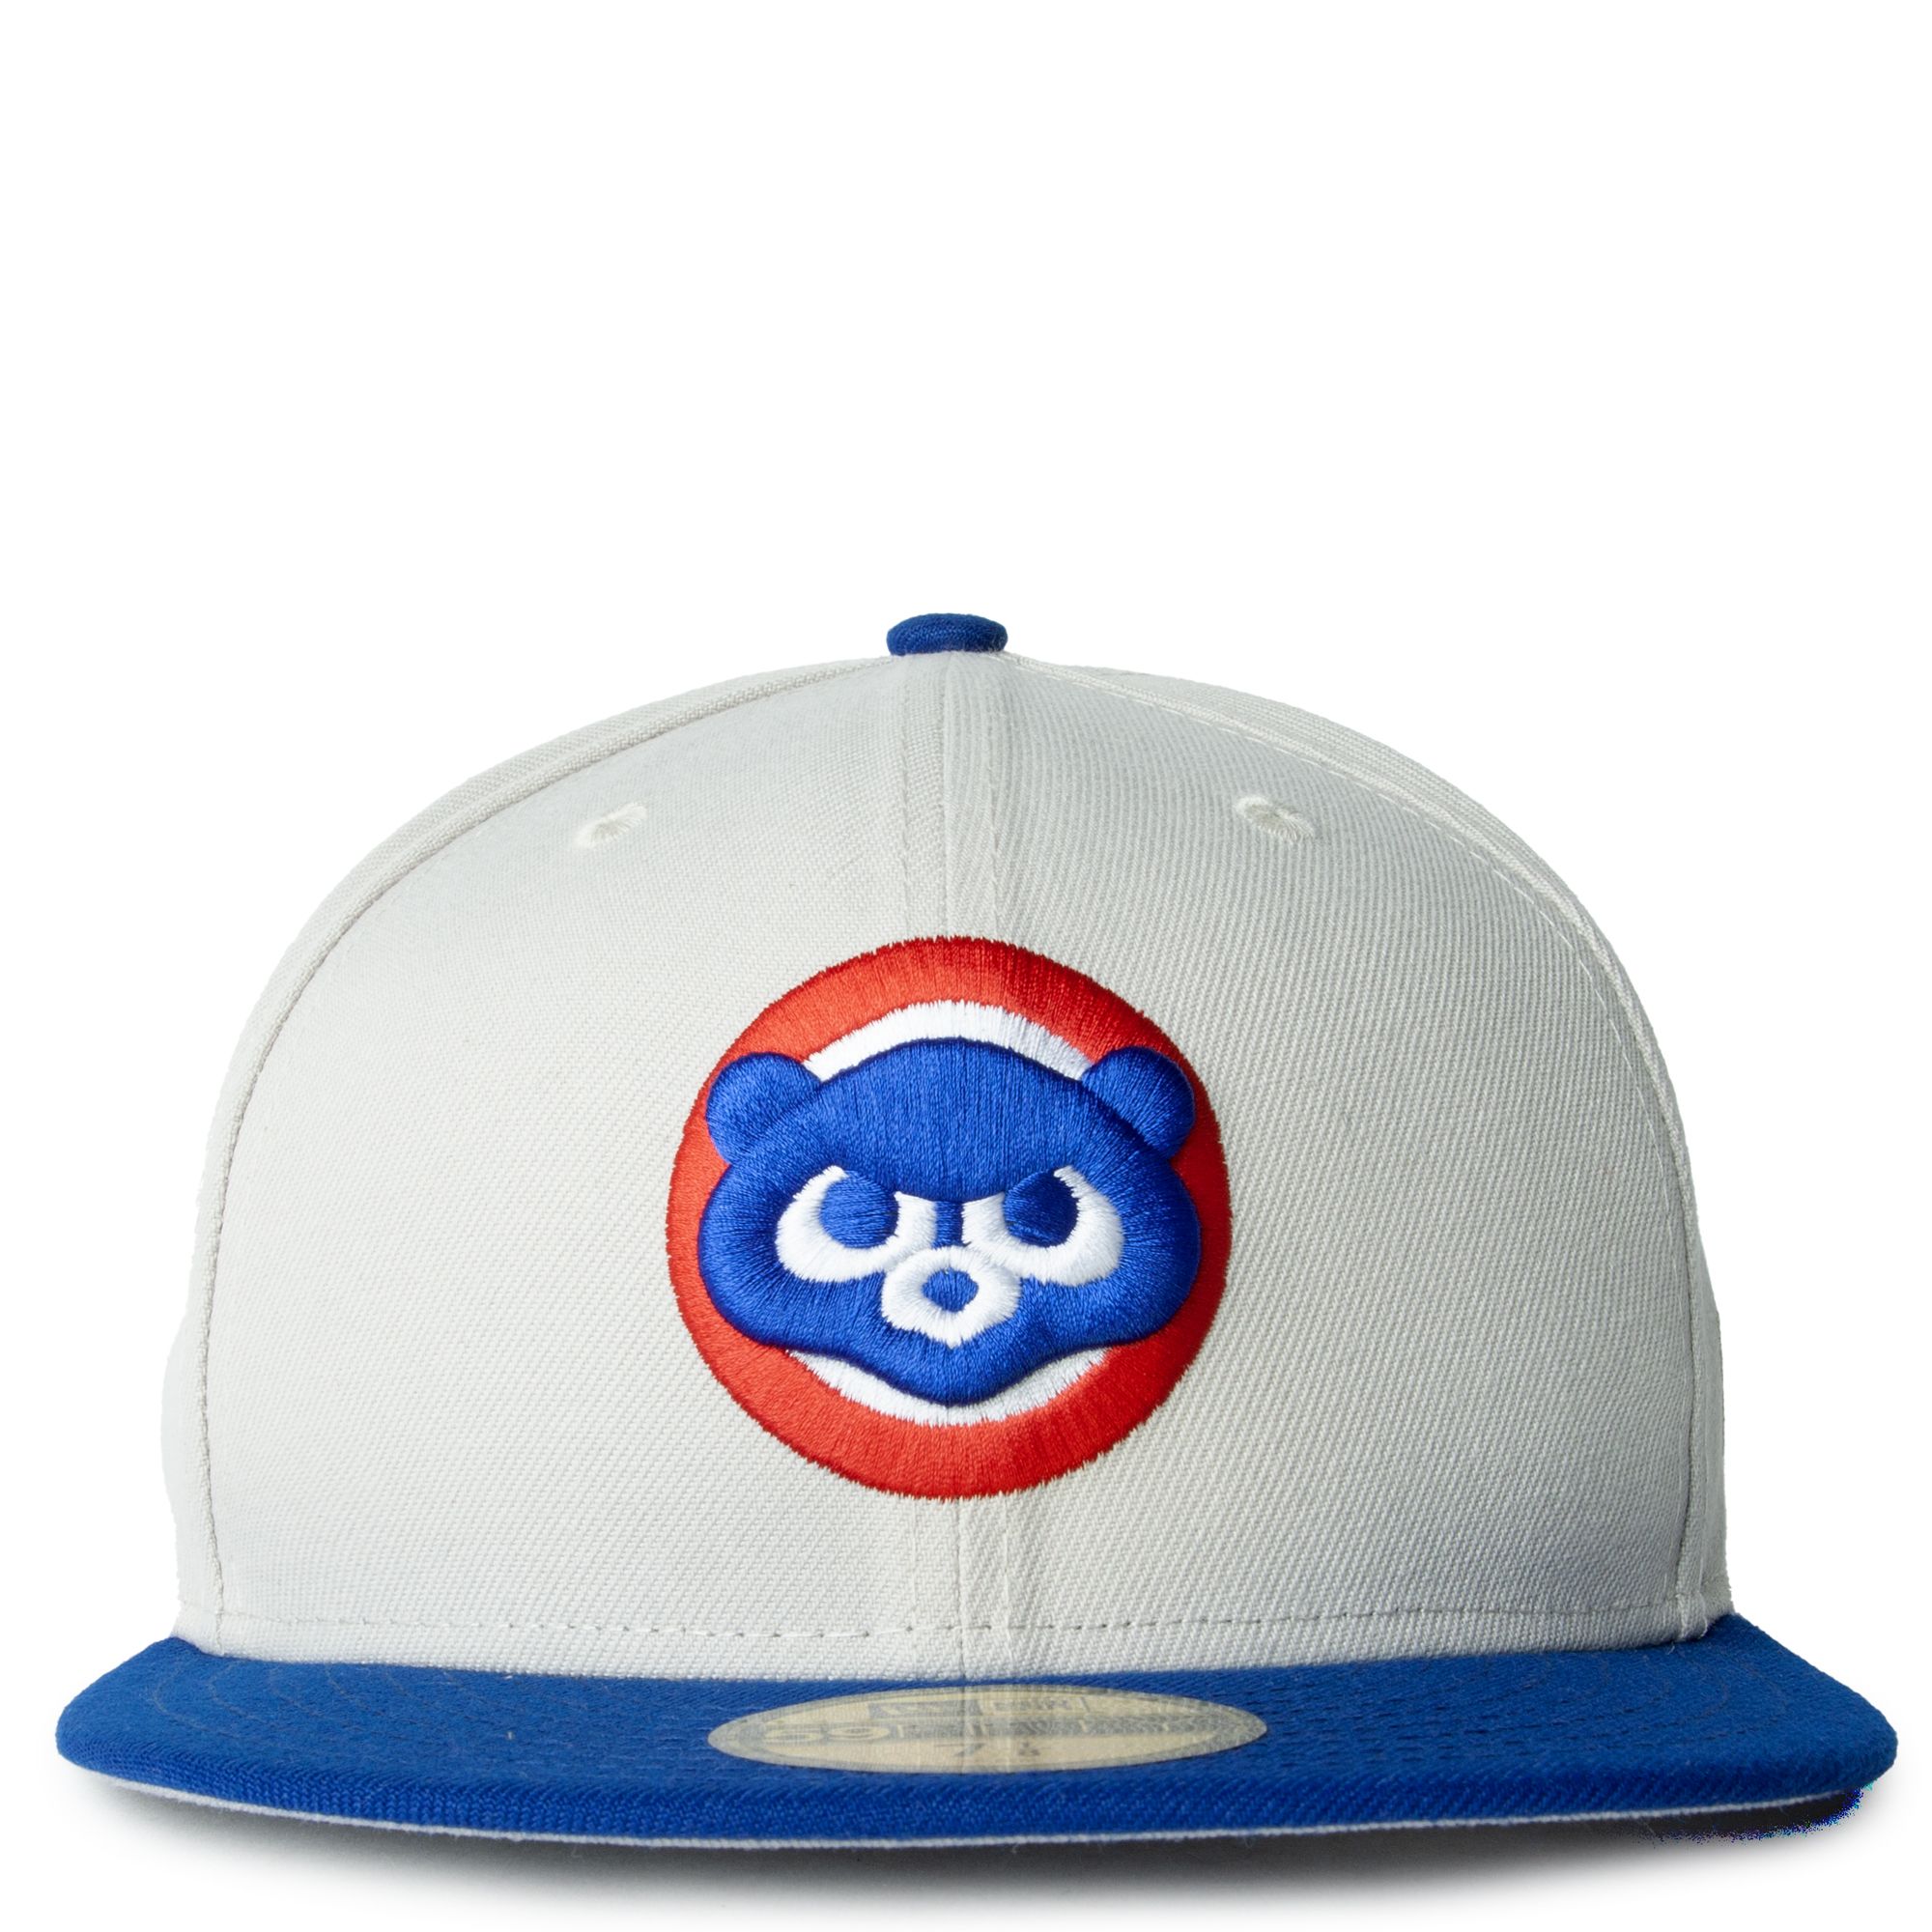 New Era MLB Chicago Cubs 59Fifty Cap - Blue - Size: 7 1/4